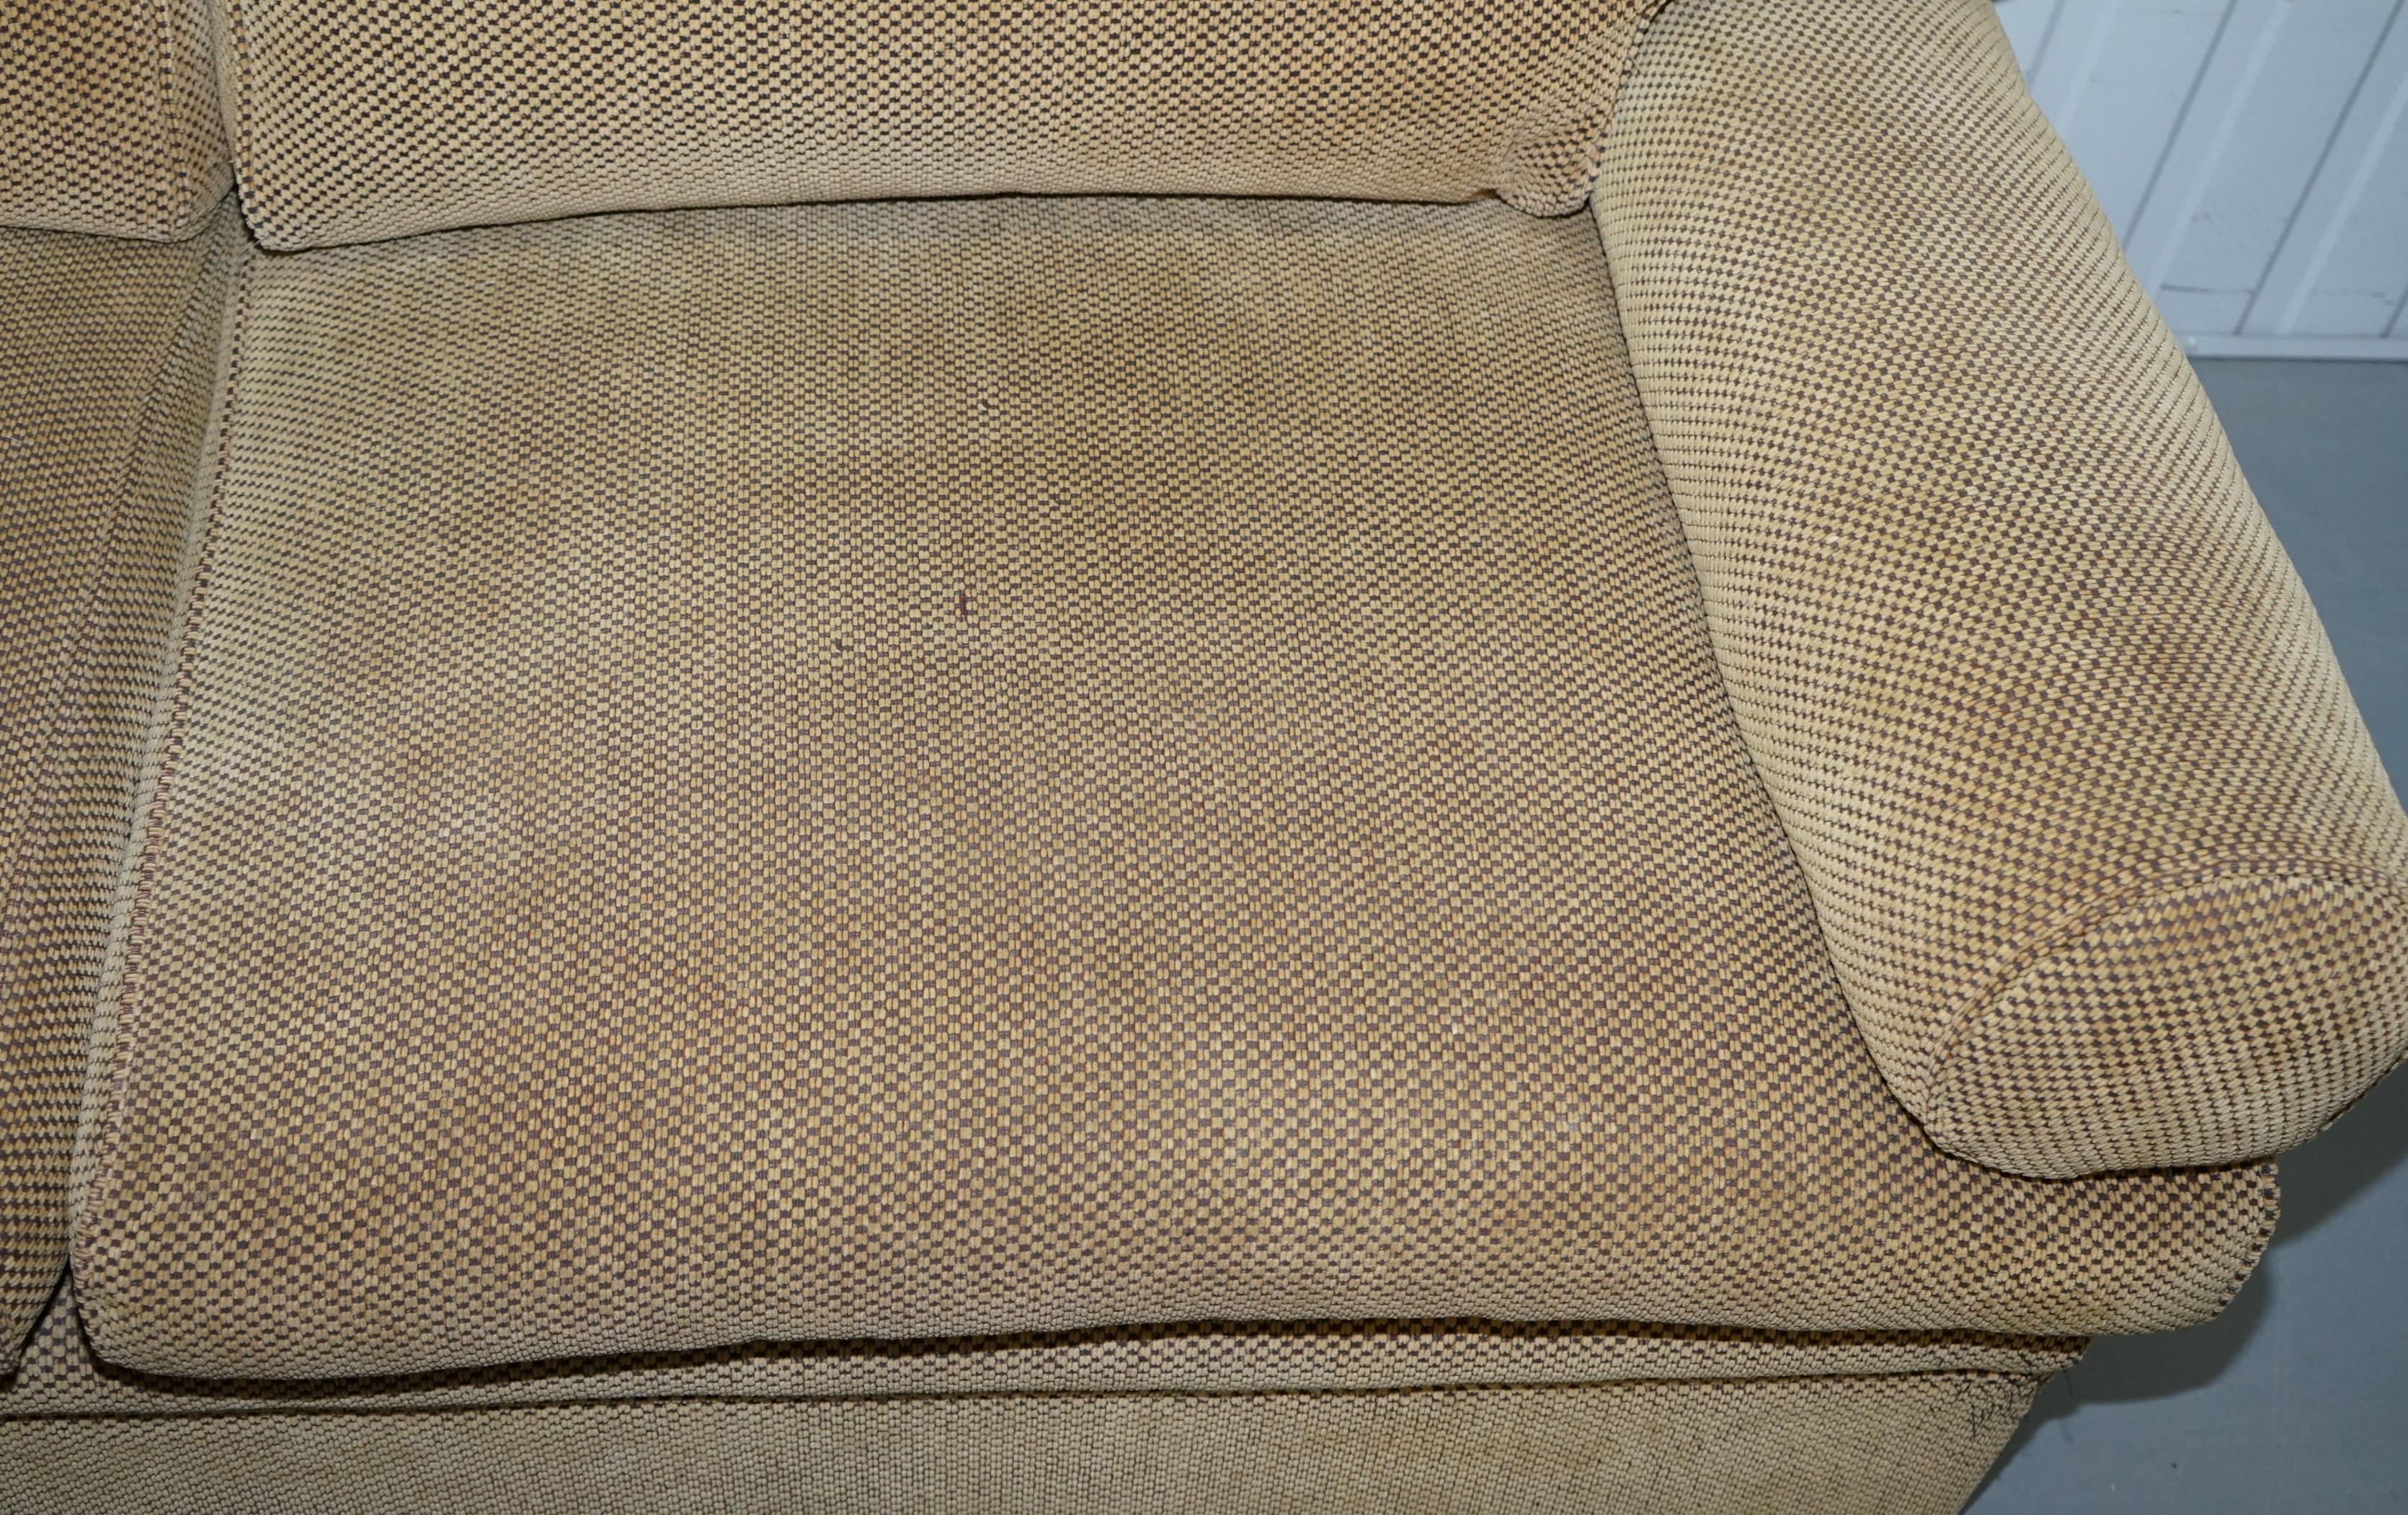 British George Smith Bolster Three-Seat Sofa Feather Filled Cushions Stamped